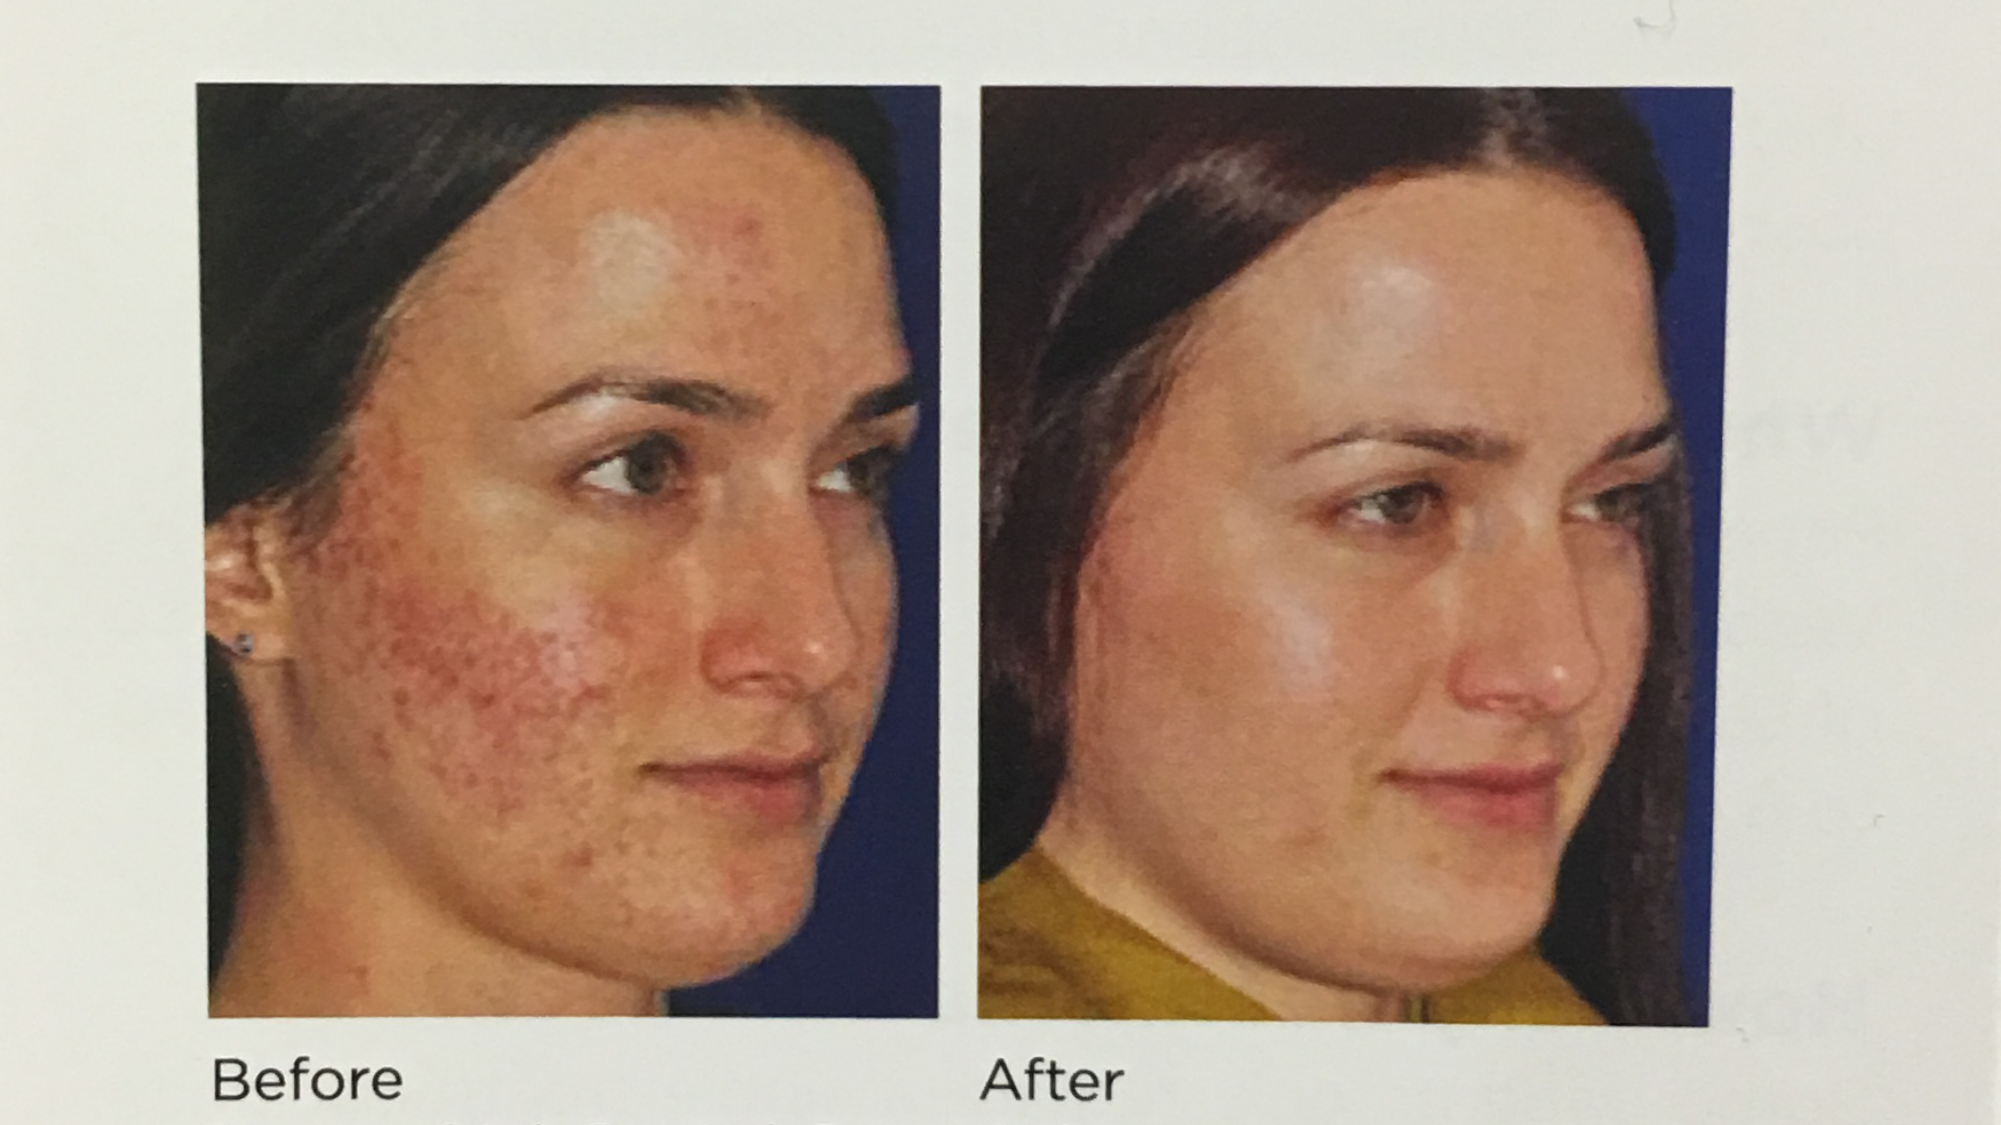 THE MIRACLE OF MICRONEEDLING